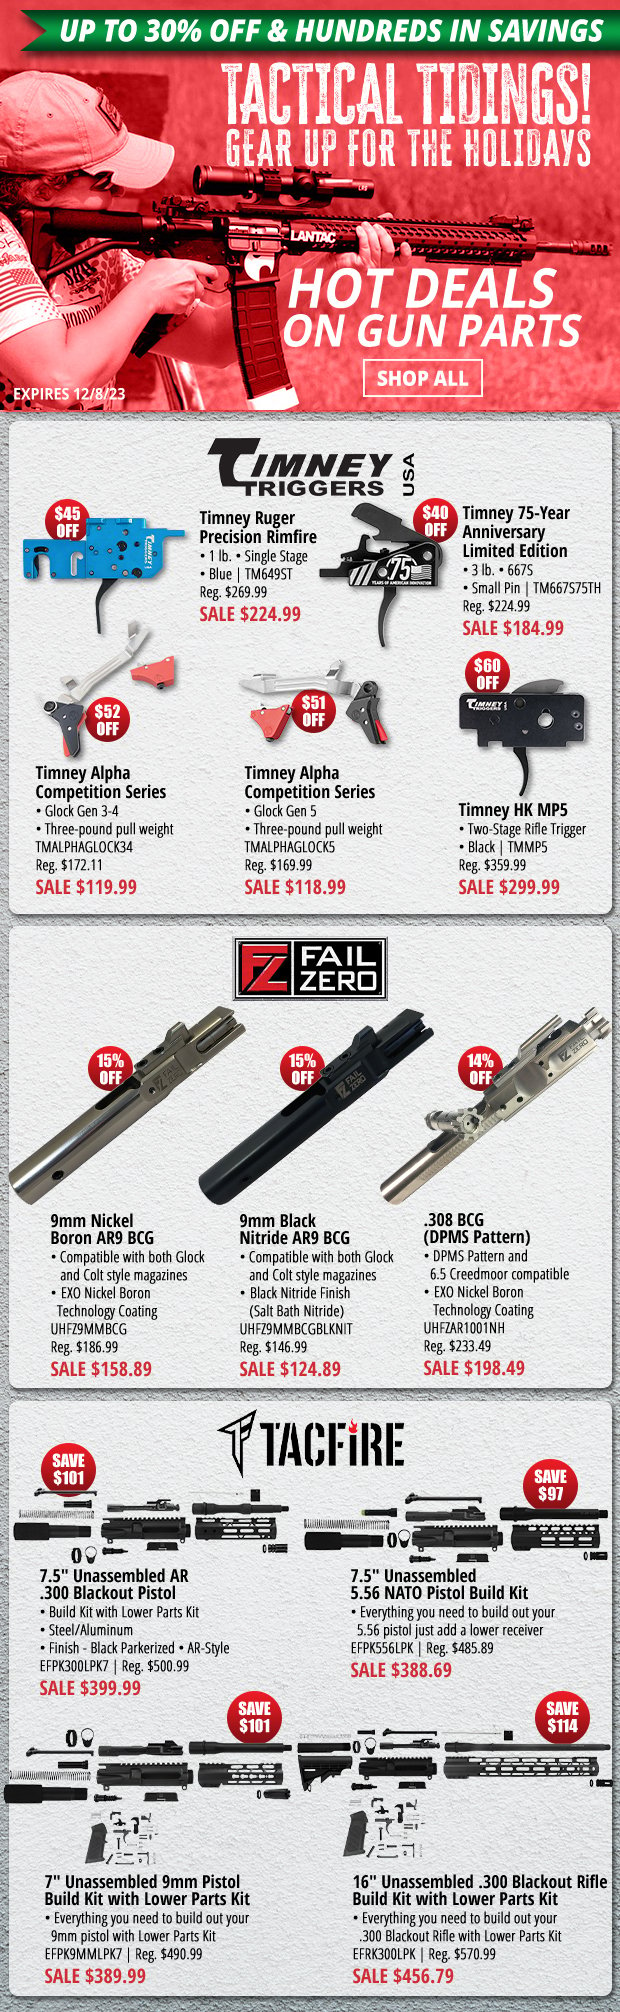 Tactical Tidings with Hundreds in Savings on Gun Parts!